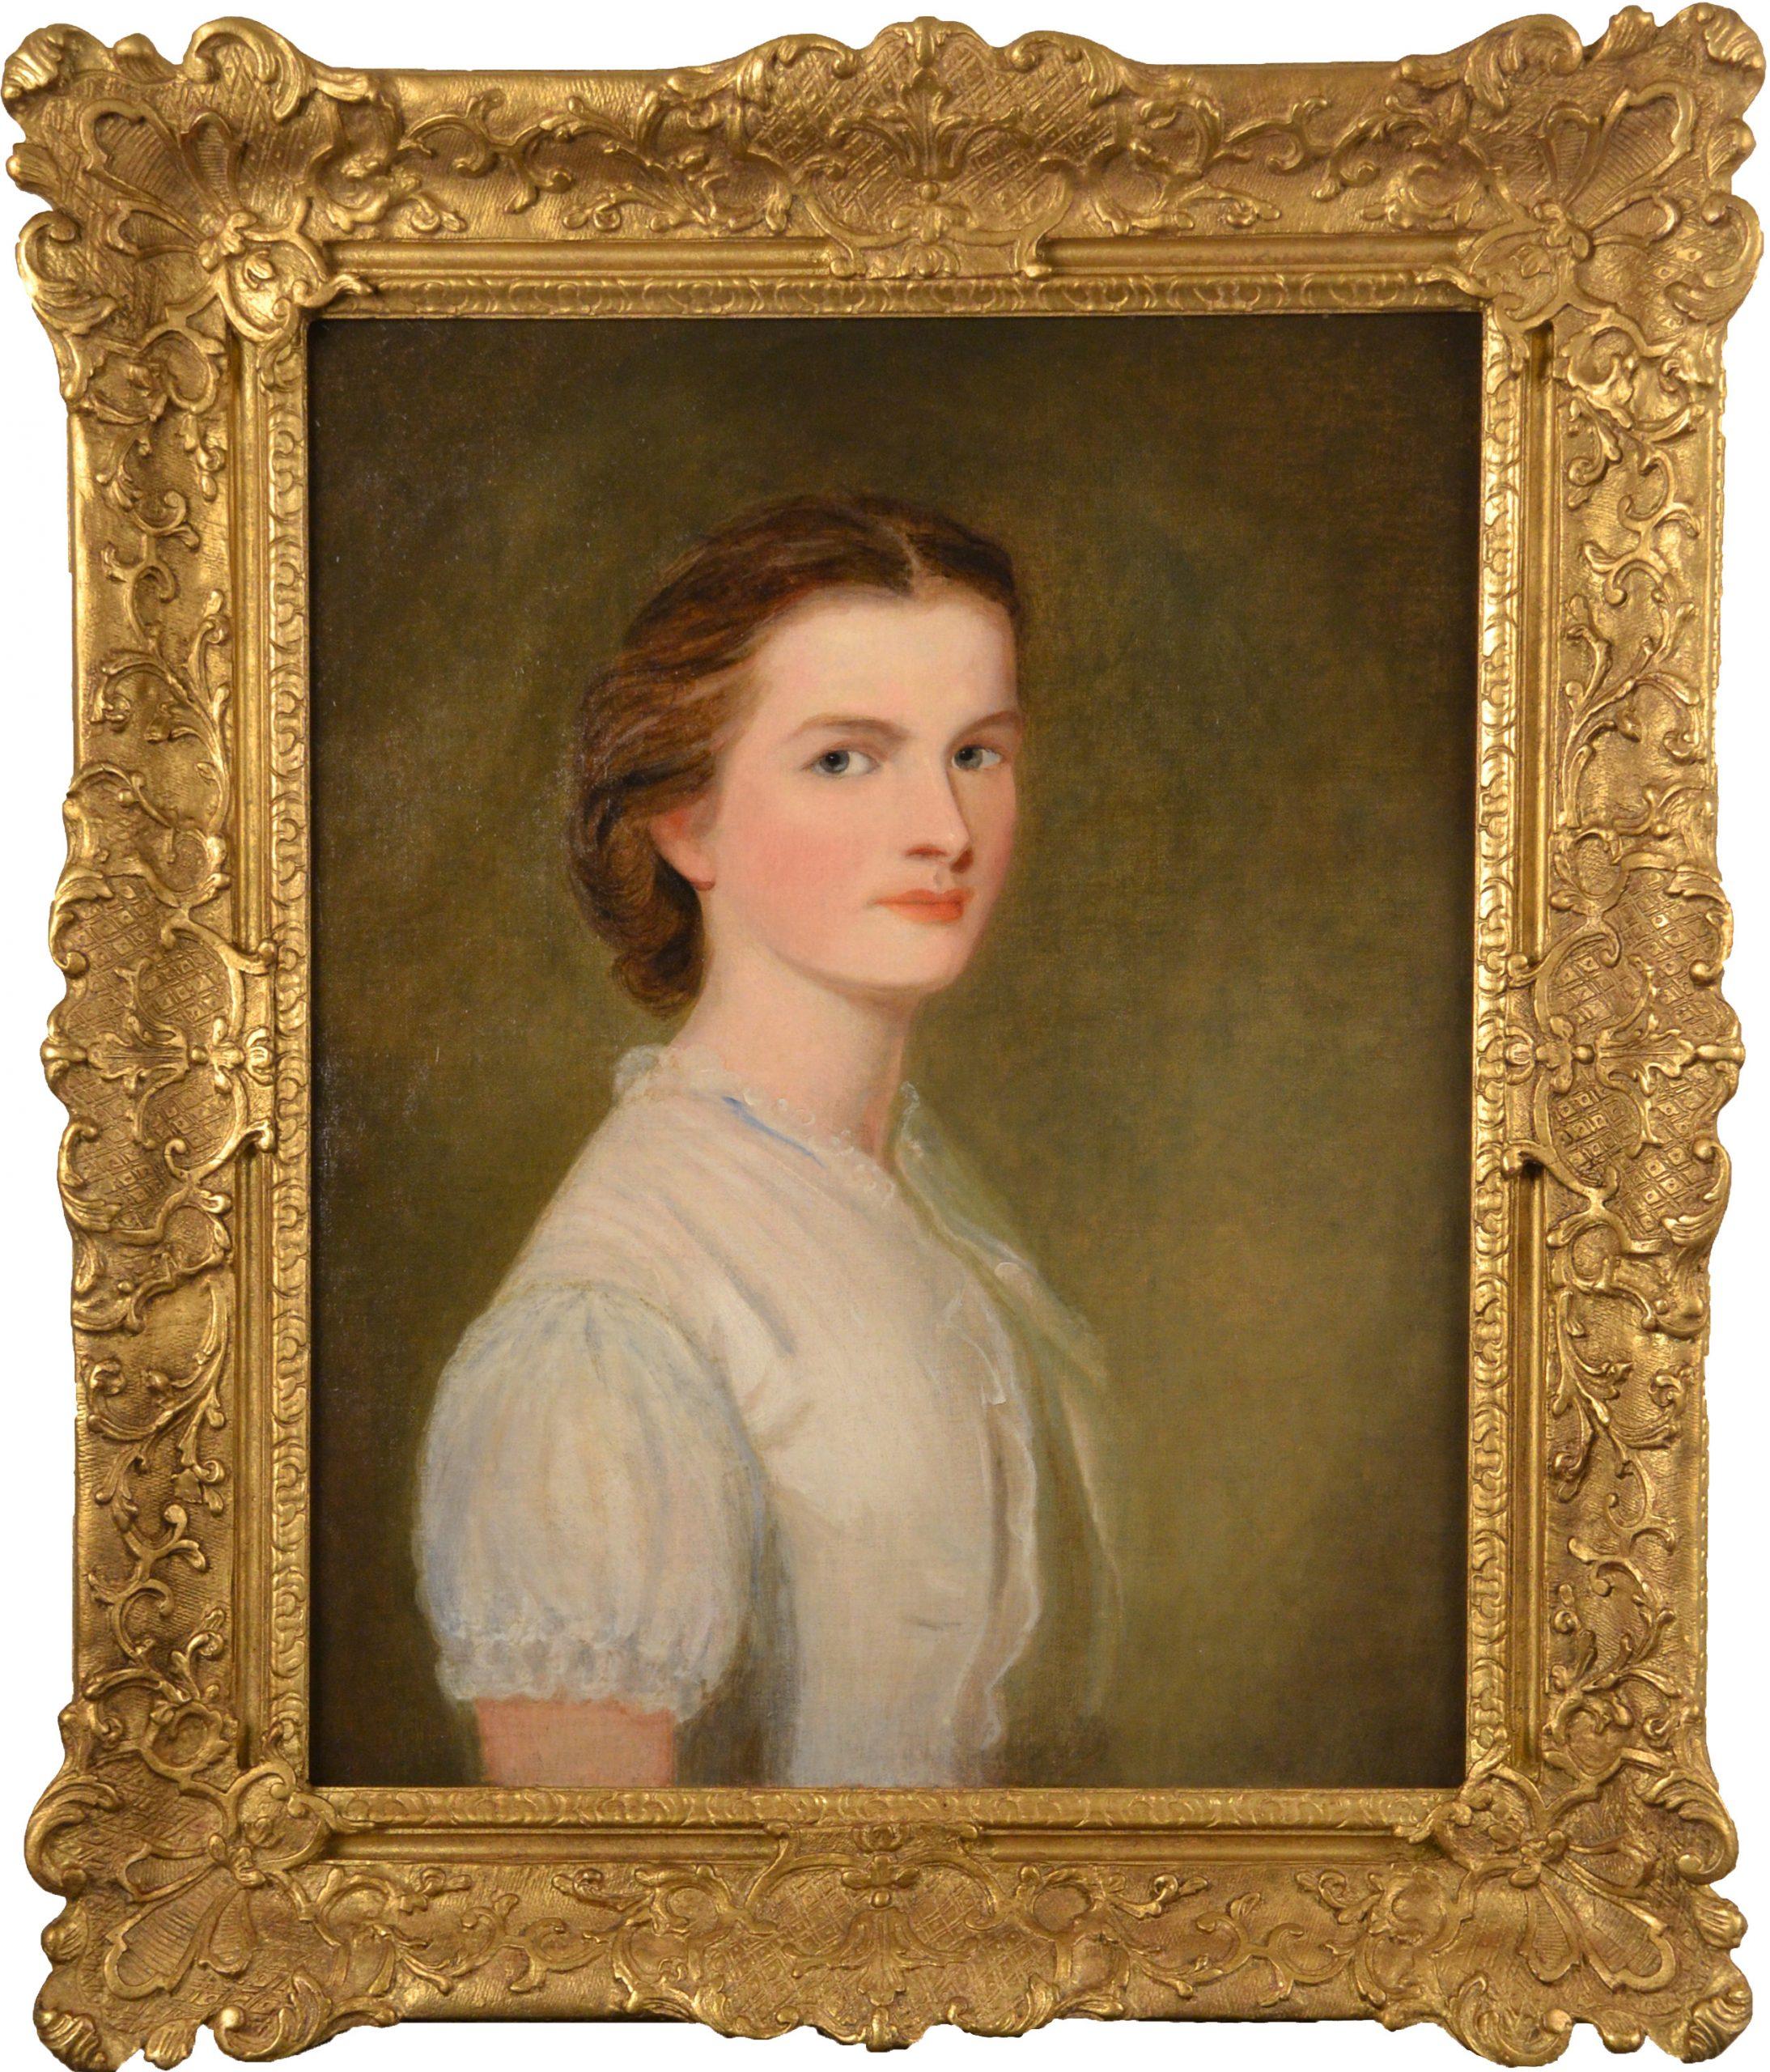 George Richmond Portrait Painting - Portrait of a Young Woman in White Blouse